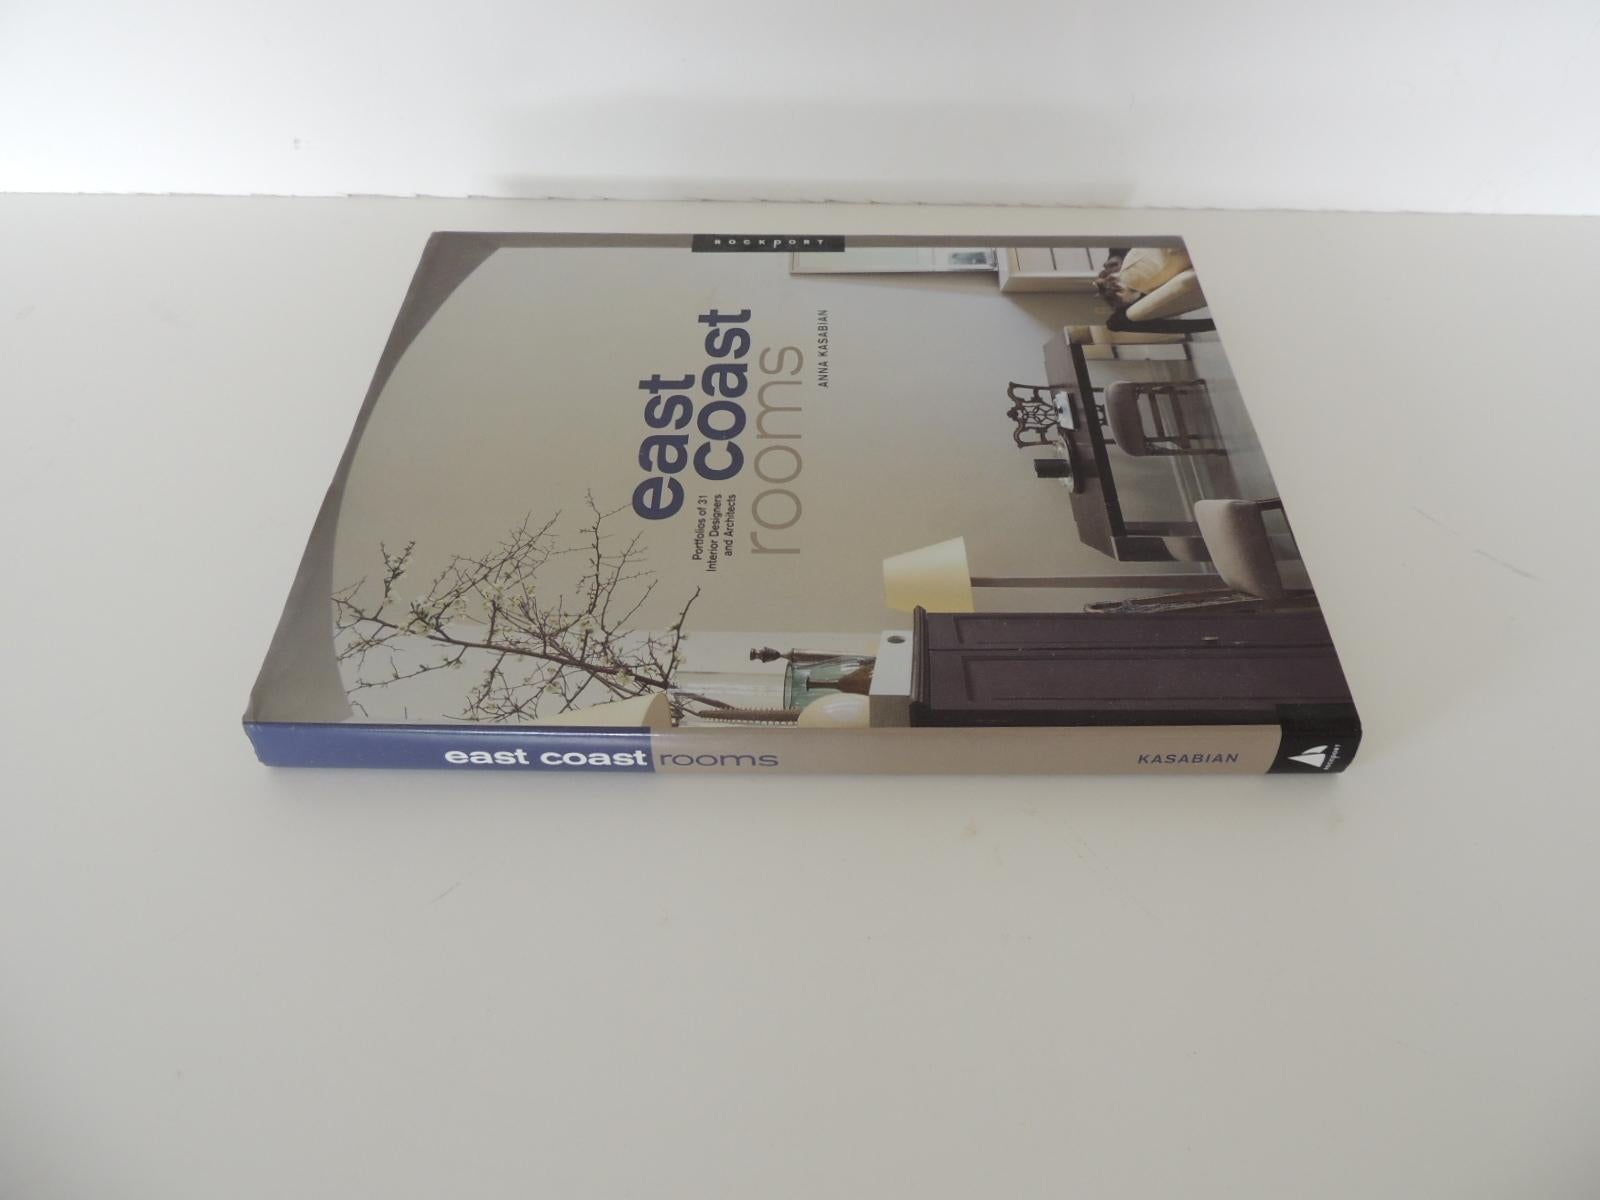 Coffee table book:
East Coast Rooms: Portfolios of 31 Interior Designers and Architects Hardcover – Bargain Price, June, 2000
by Anna Kasabian (Author)
